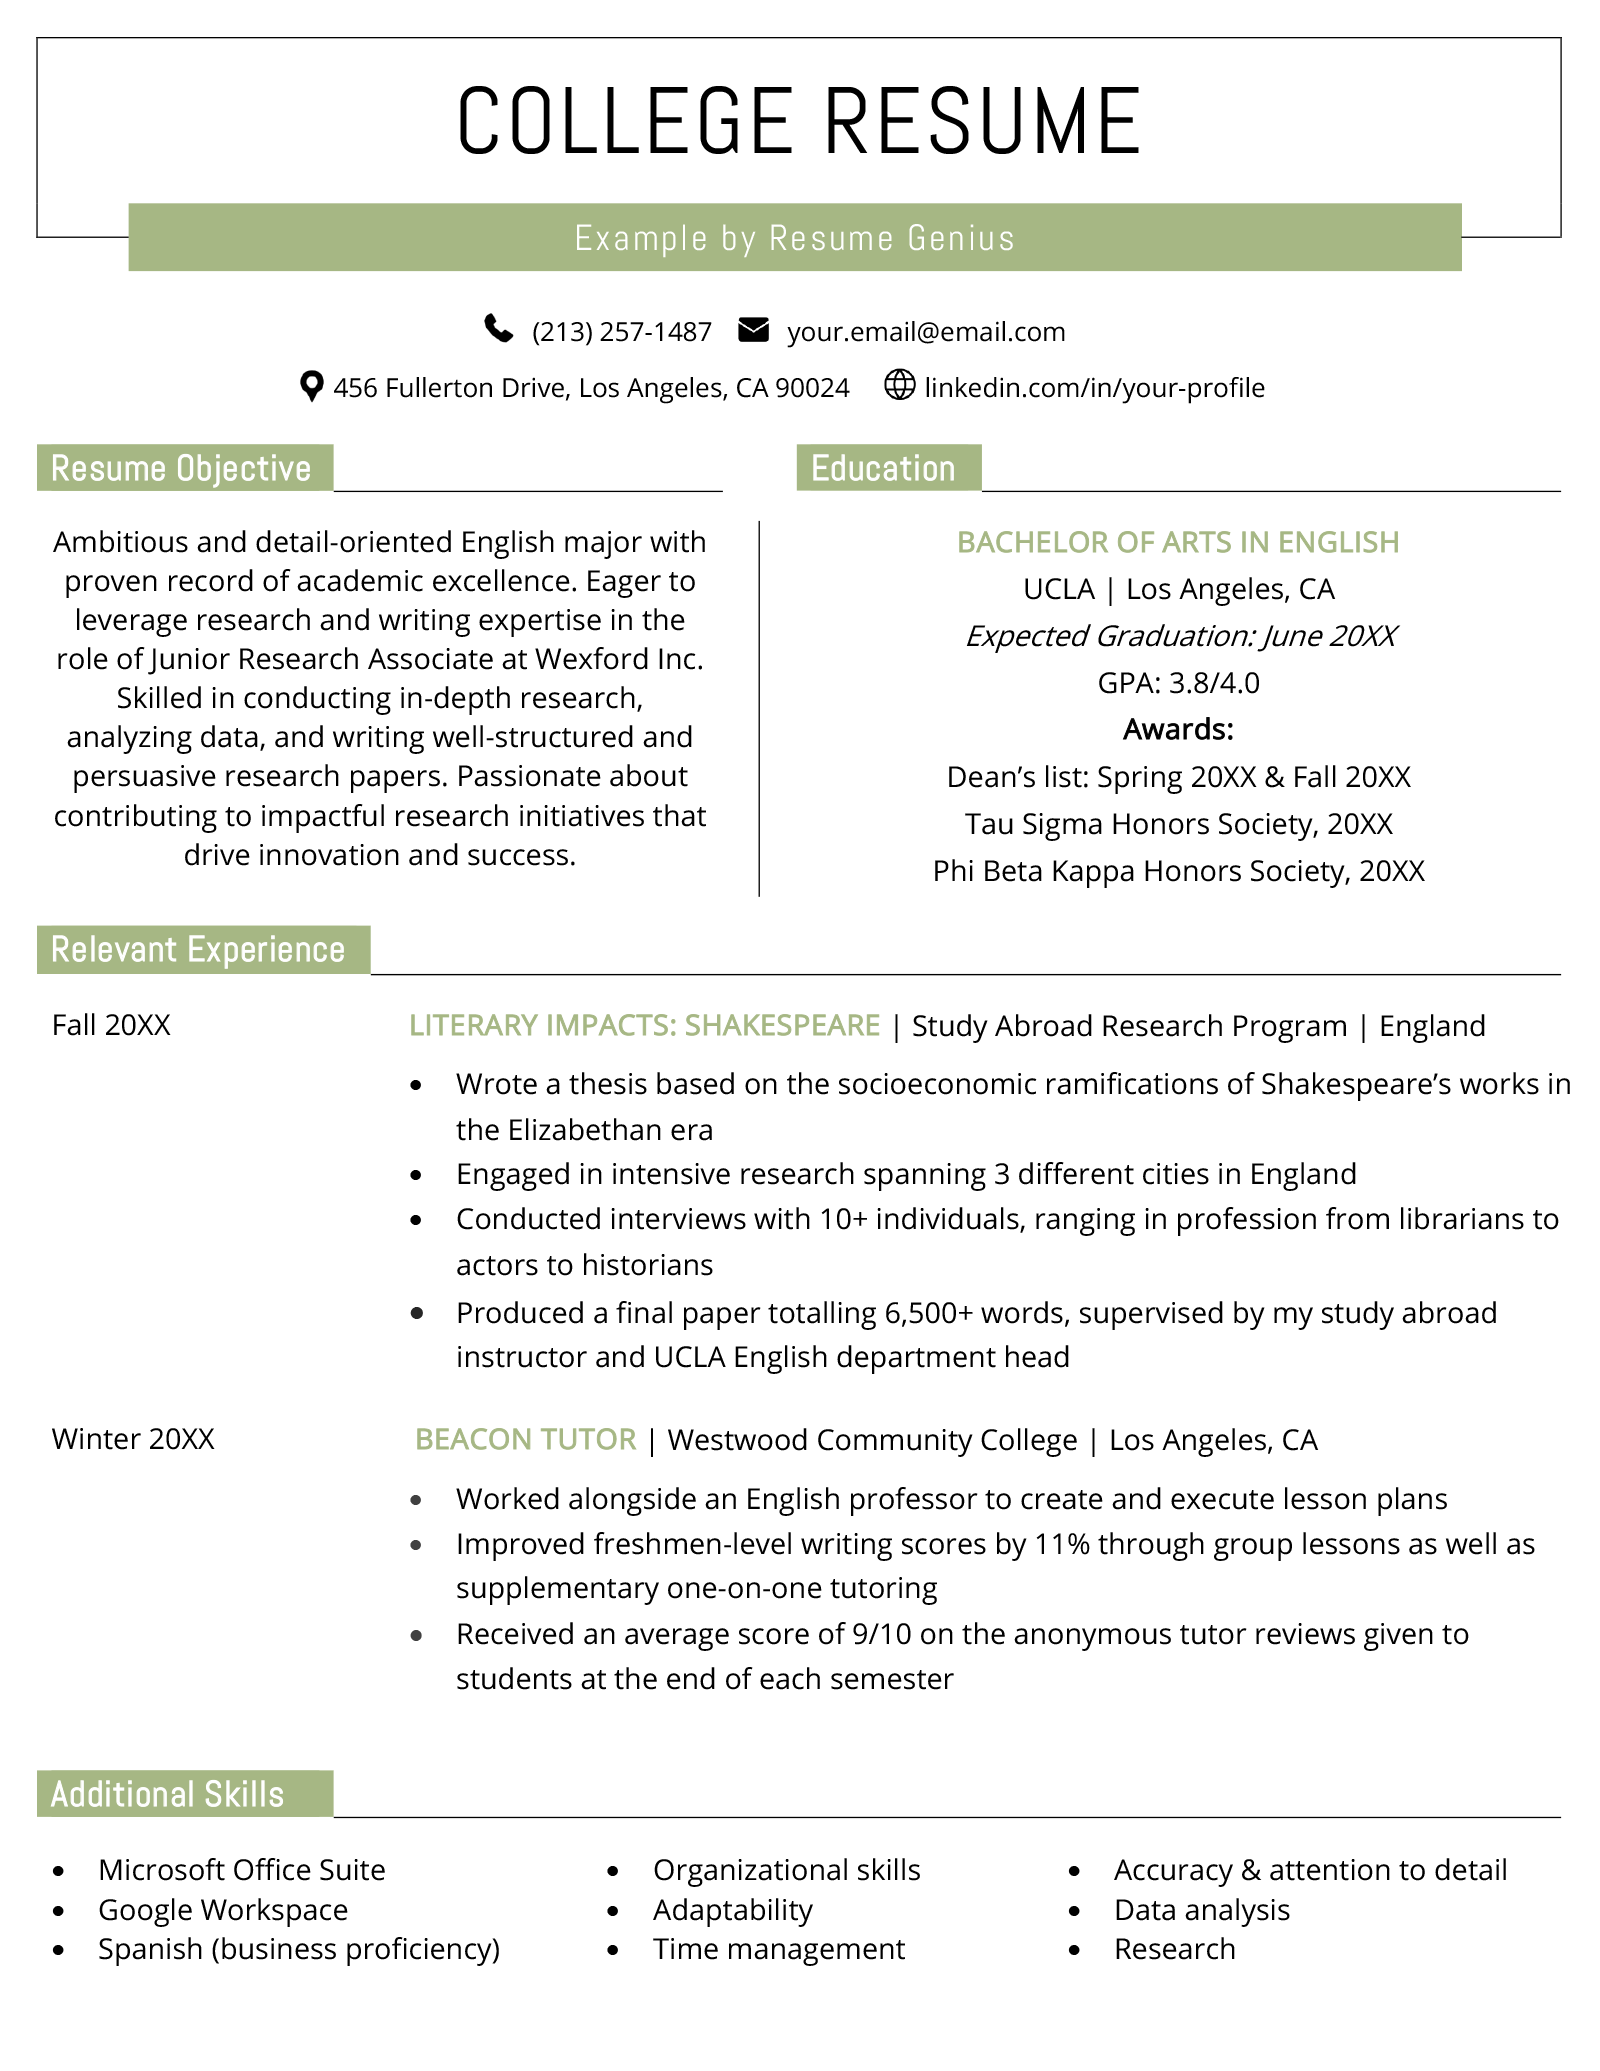 An example of a resume template for Microsoft Word that's suitable for a college student